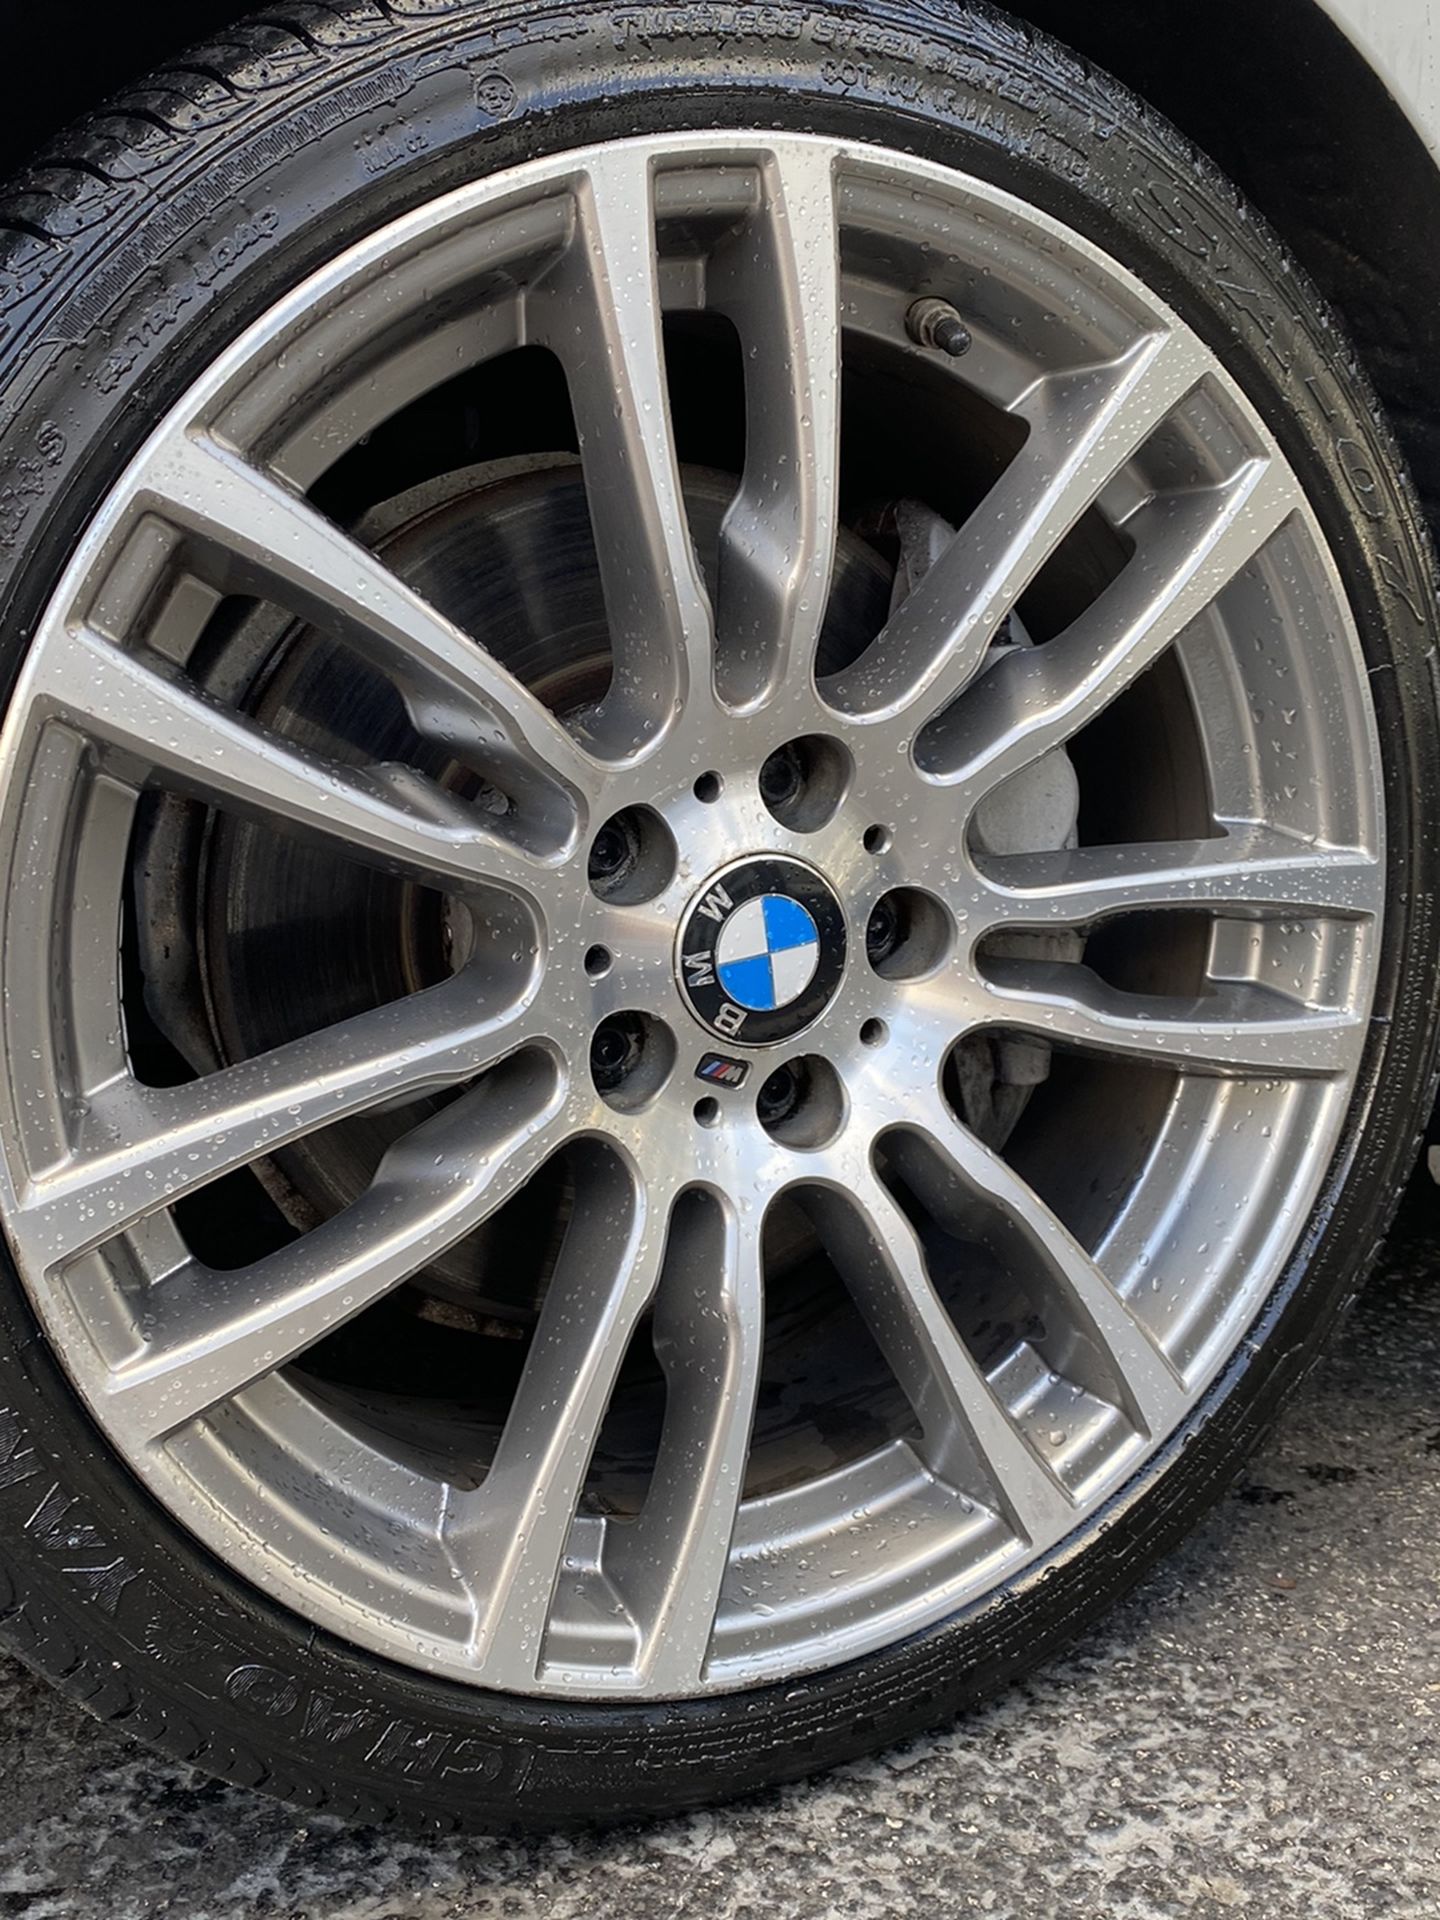 Bmw Rims 19” 403 M Sport Rims and Landsail Tires included.